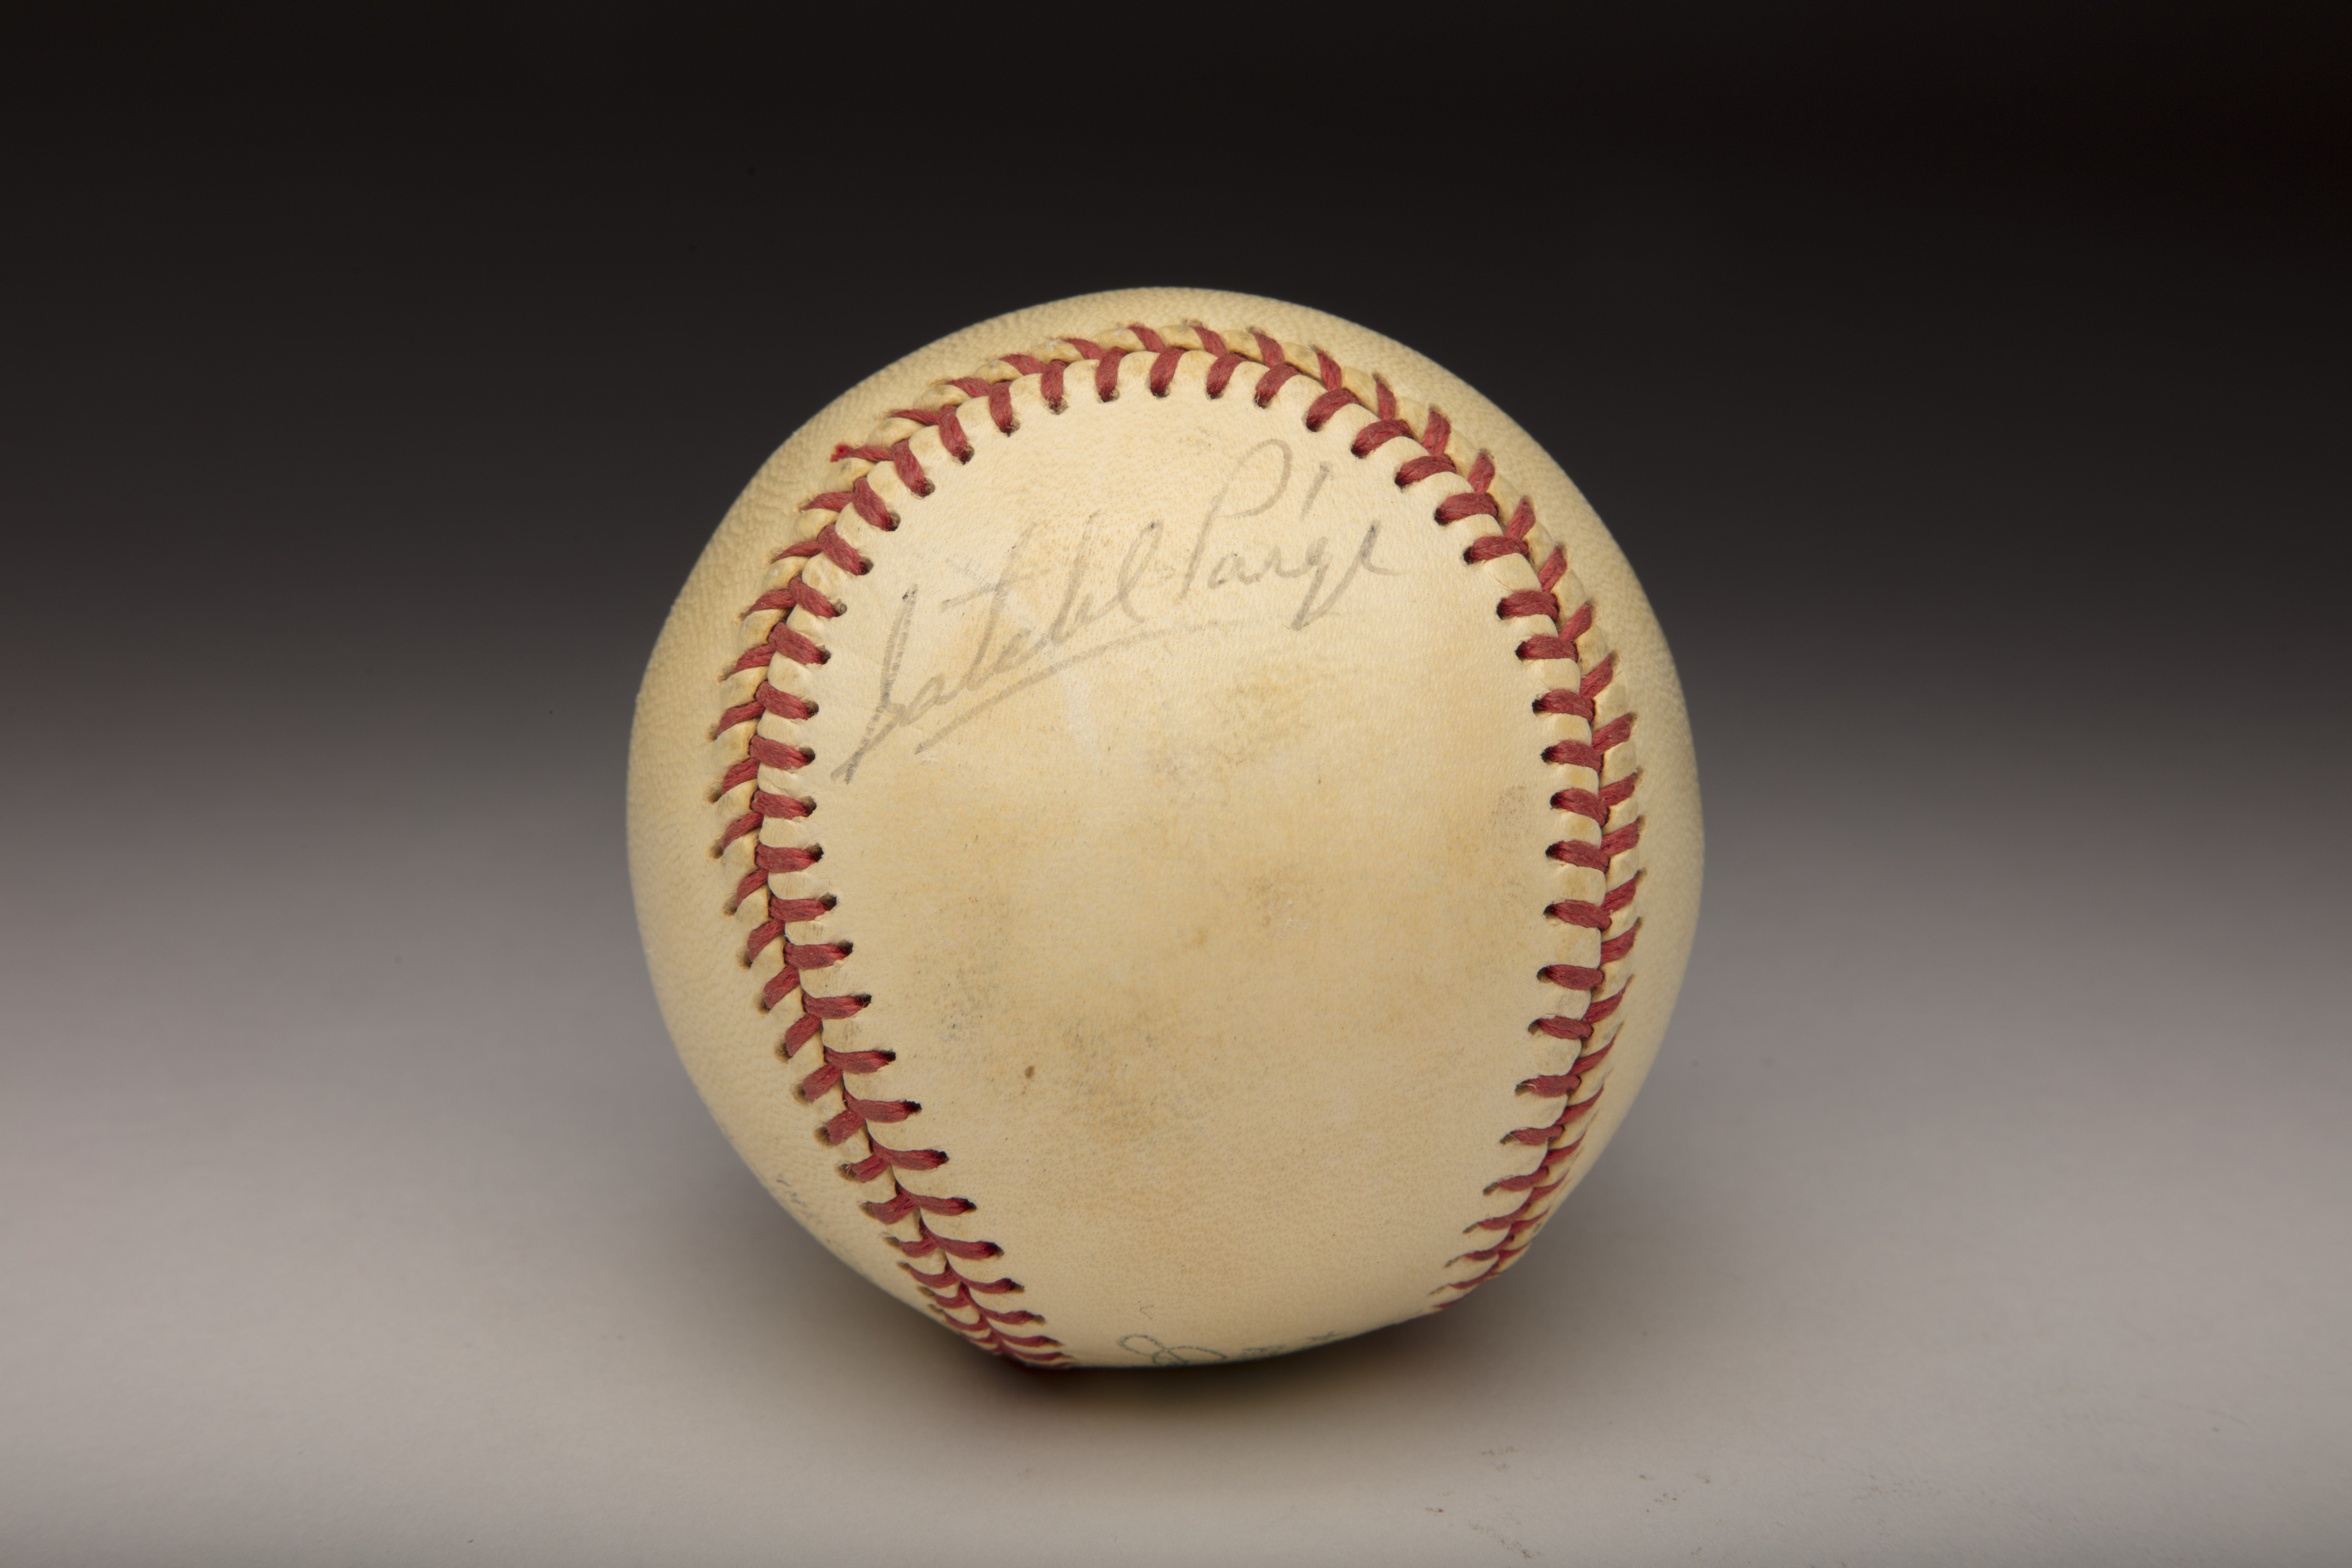 Black ThenRemembering The Life Of Baseball Hall Of Fame Pitcher, Satchel  Paige - Black Then